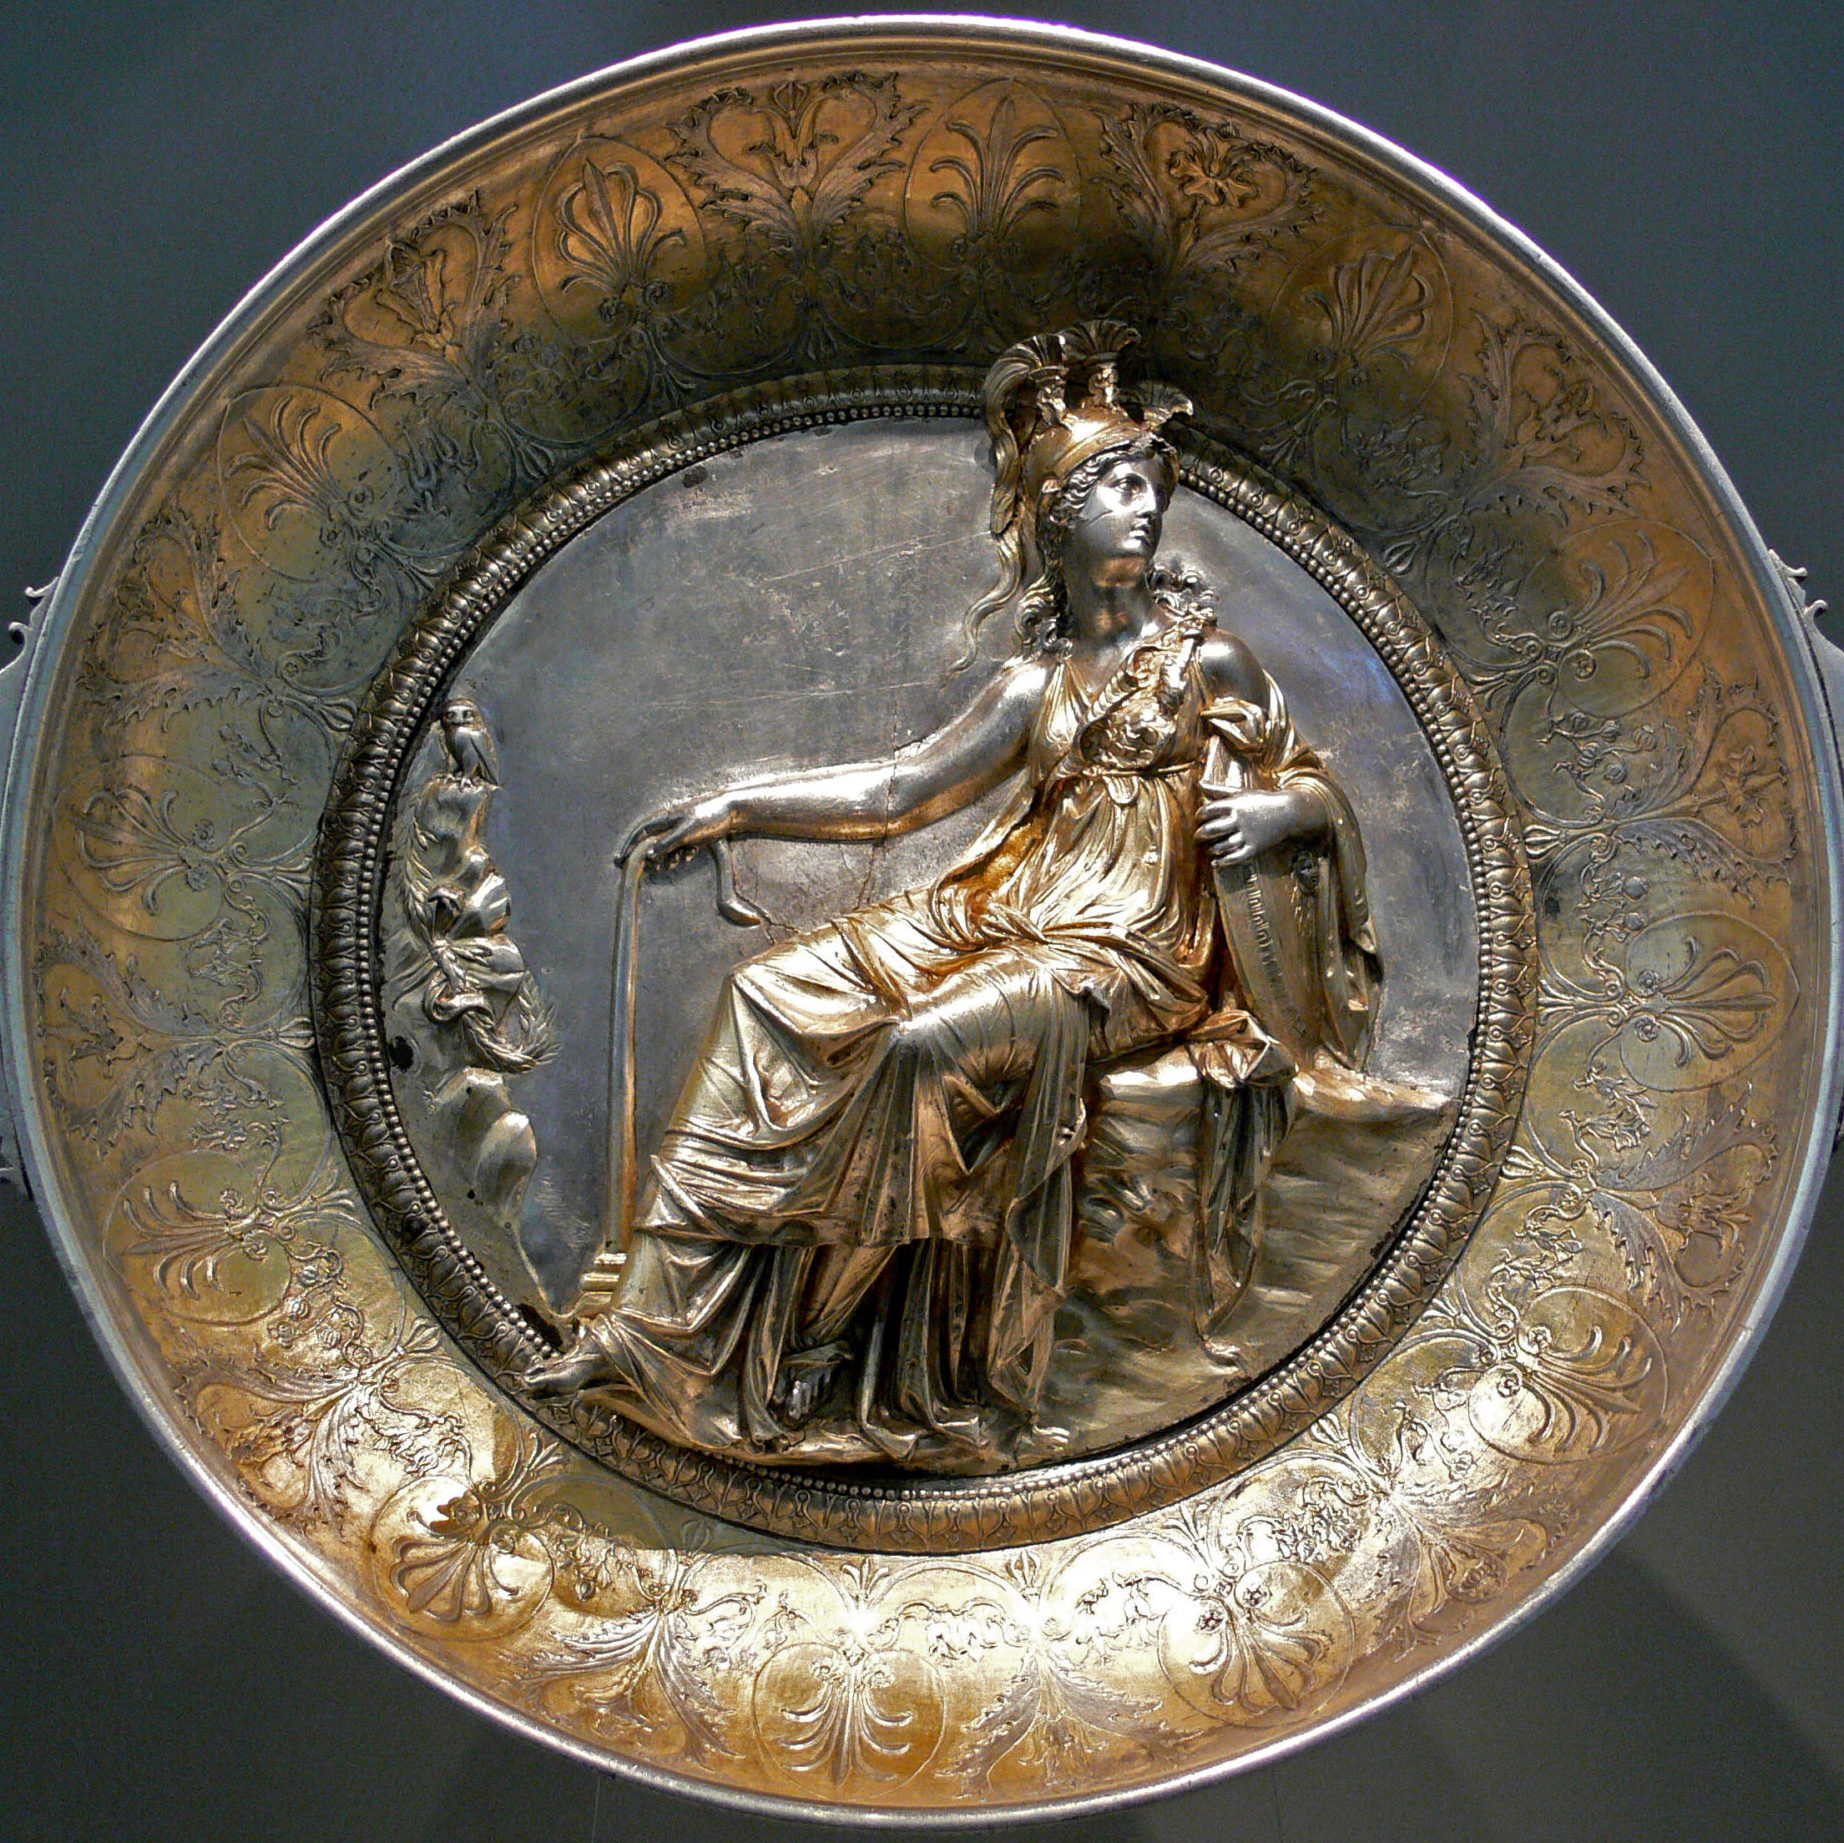 Athena, draped and seated. He is holding a staff in one hand a shield in the other, and has as plumed helm on her head.